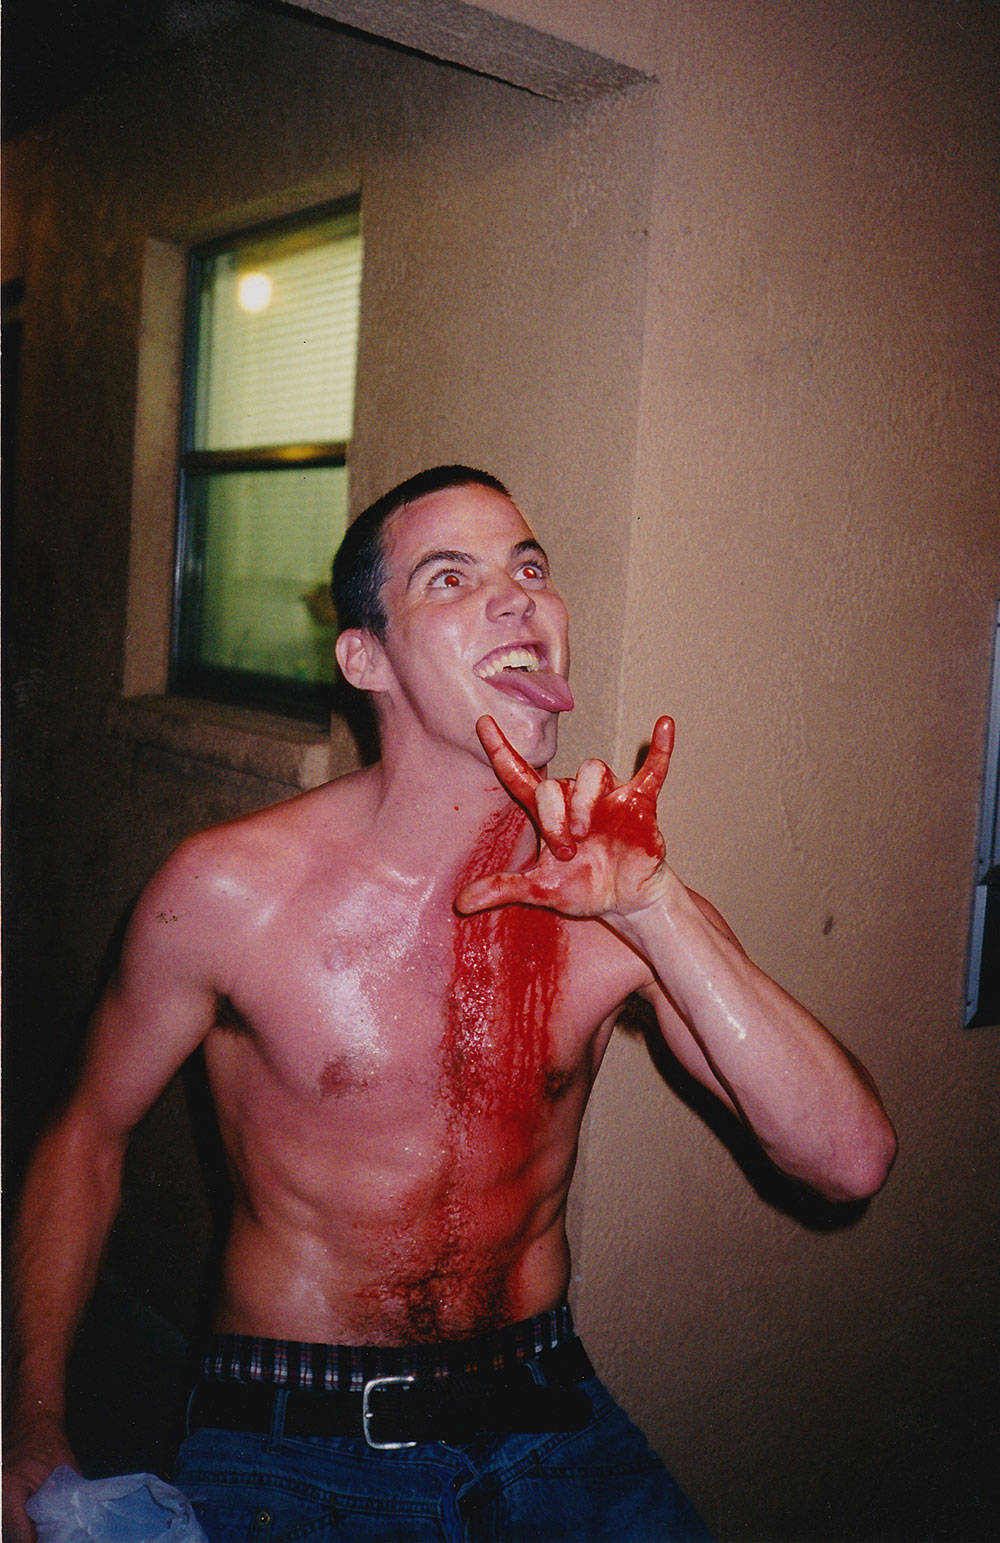 Steve-O with head injury. A white shirtless man sticks his tongue out and makes a hand signal as blood runs down his chest.